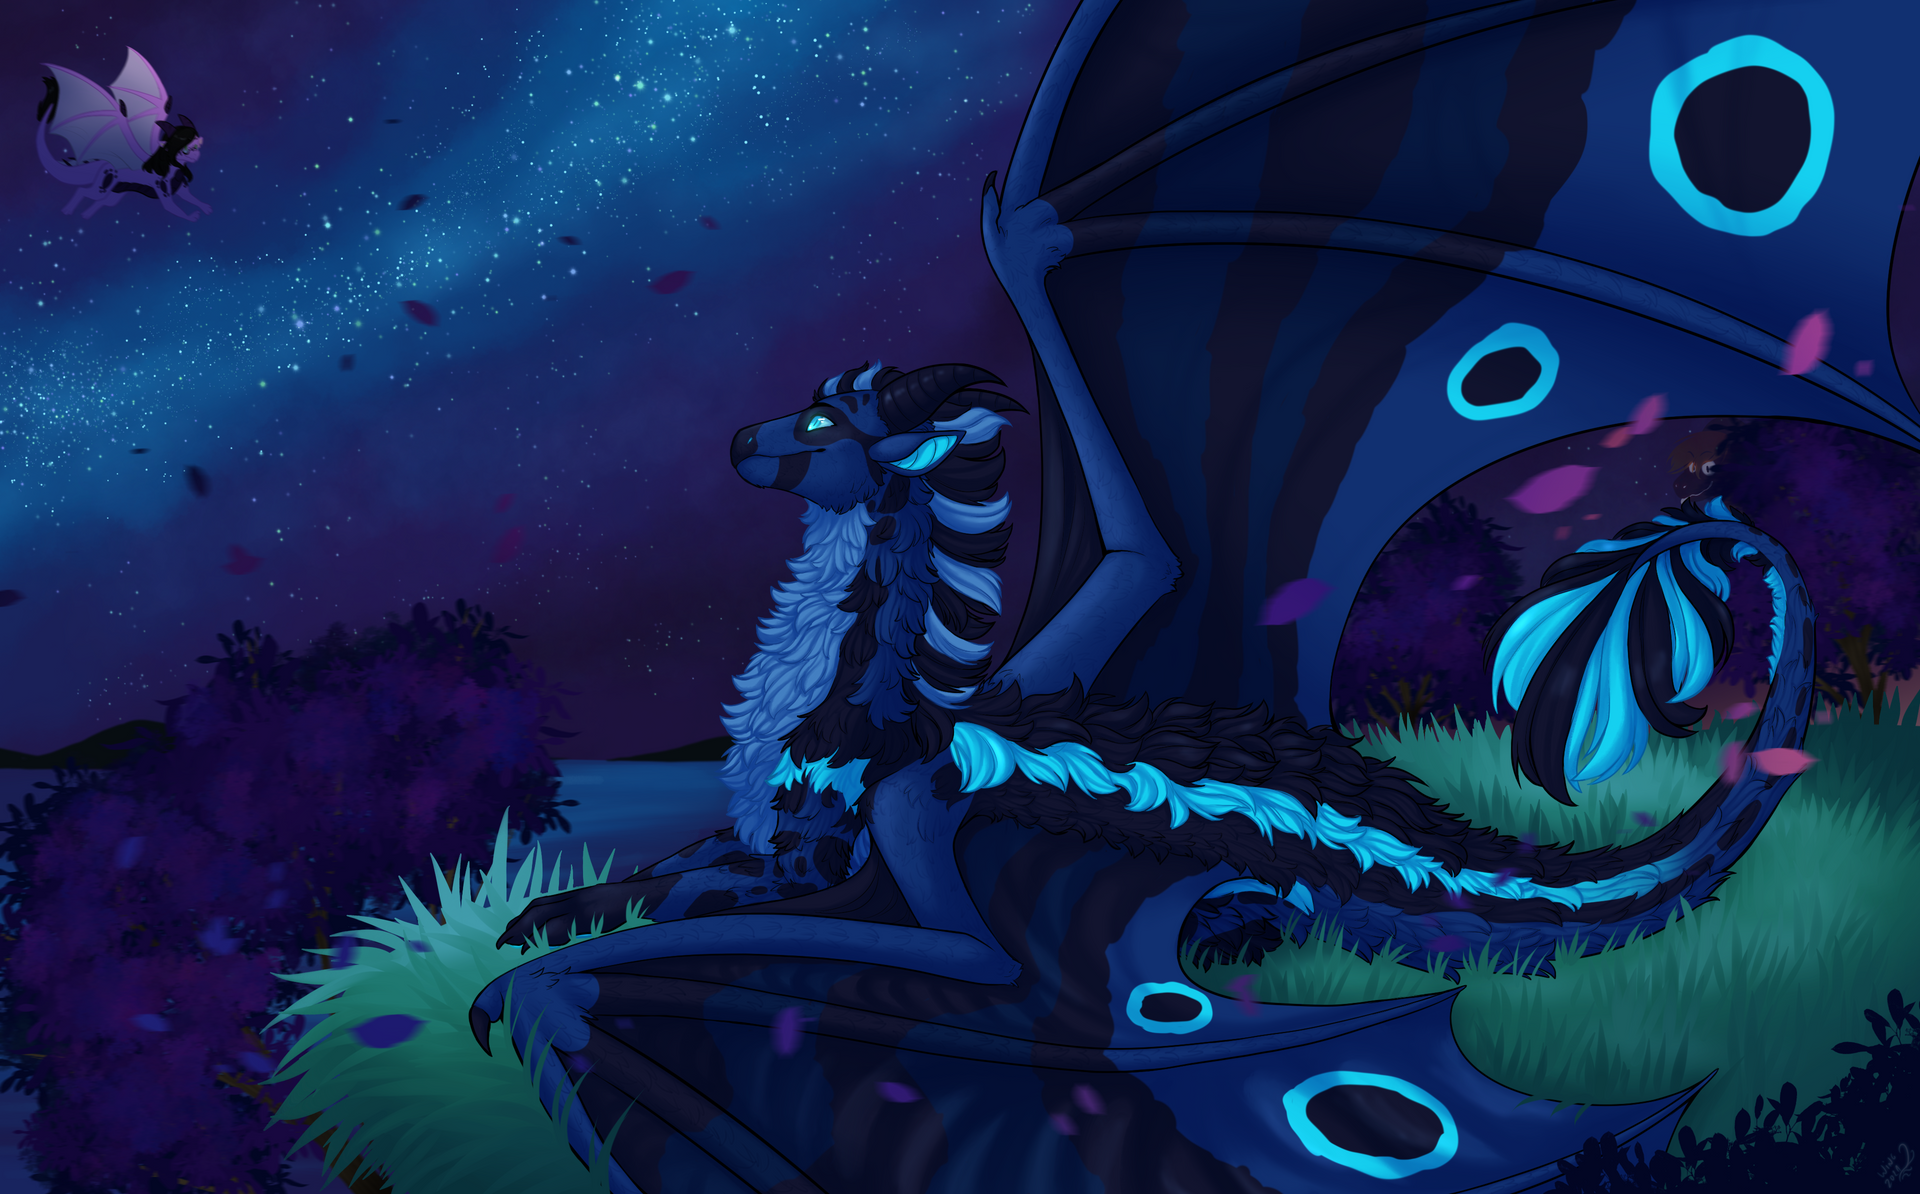 c__waiting_for_you_by_galaxywings_art_detyd7t-fullview.png